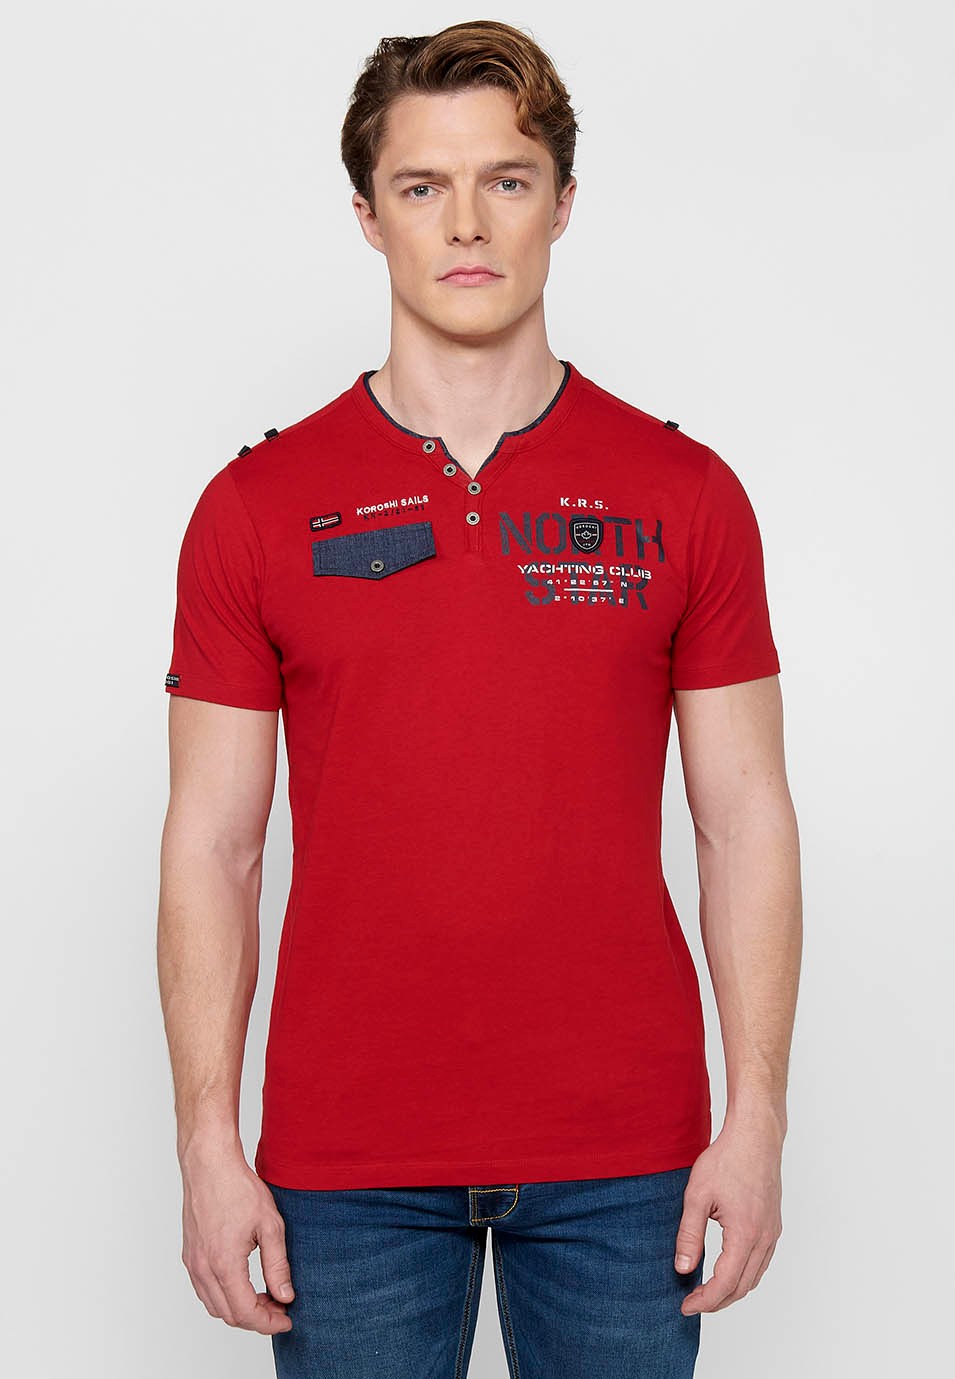 Short Sleeve Cotton T-shirt with Round Neck with Buttoned Opening in Red for Men 1